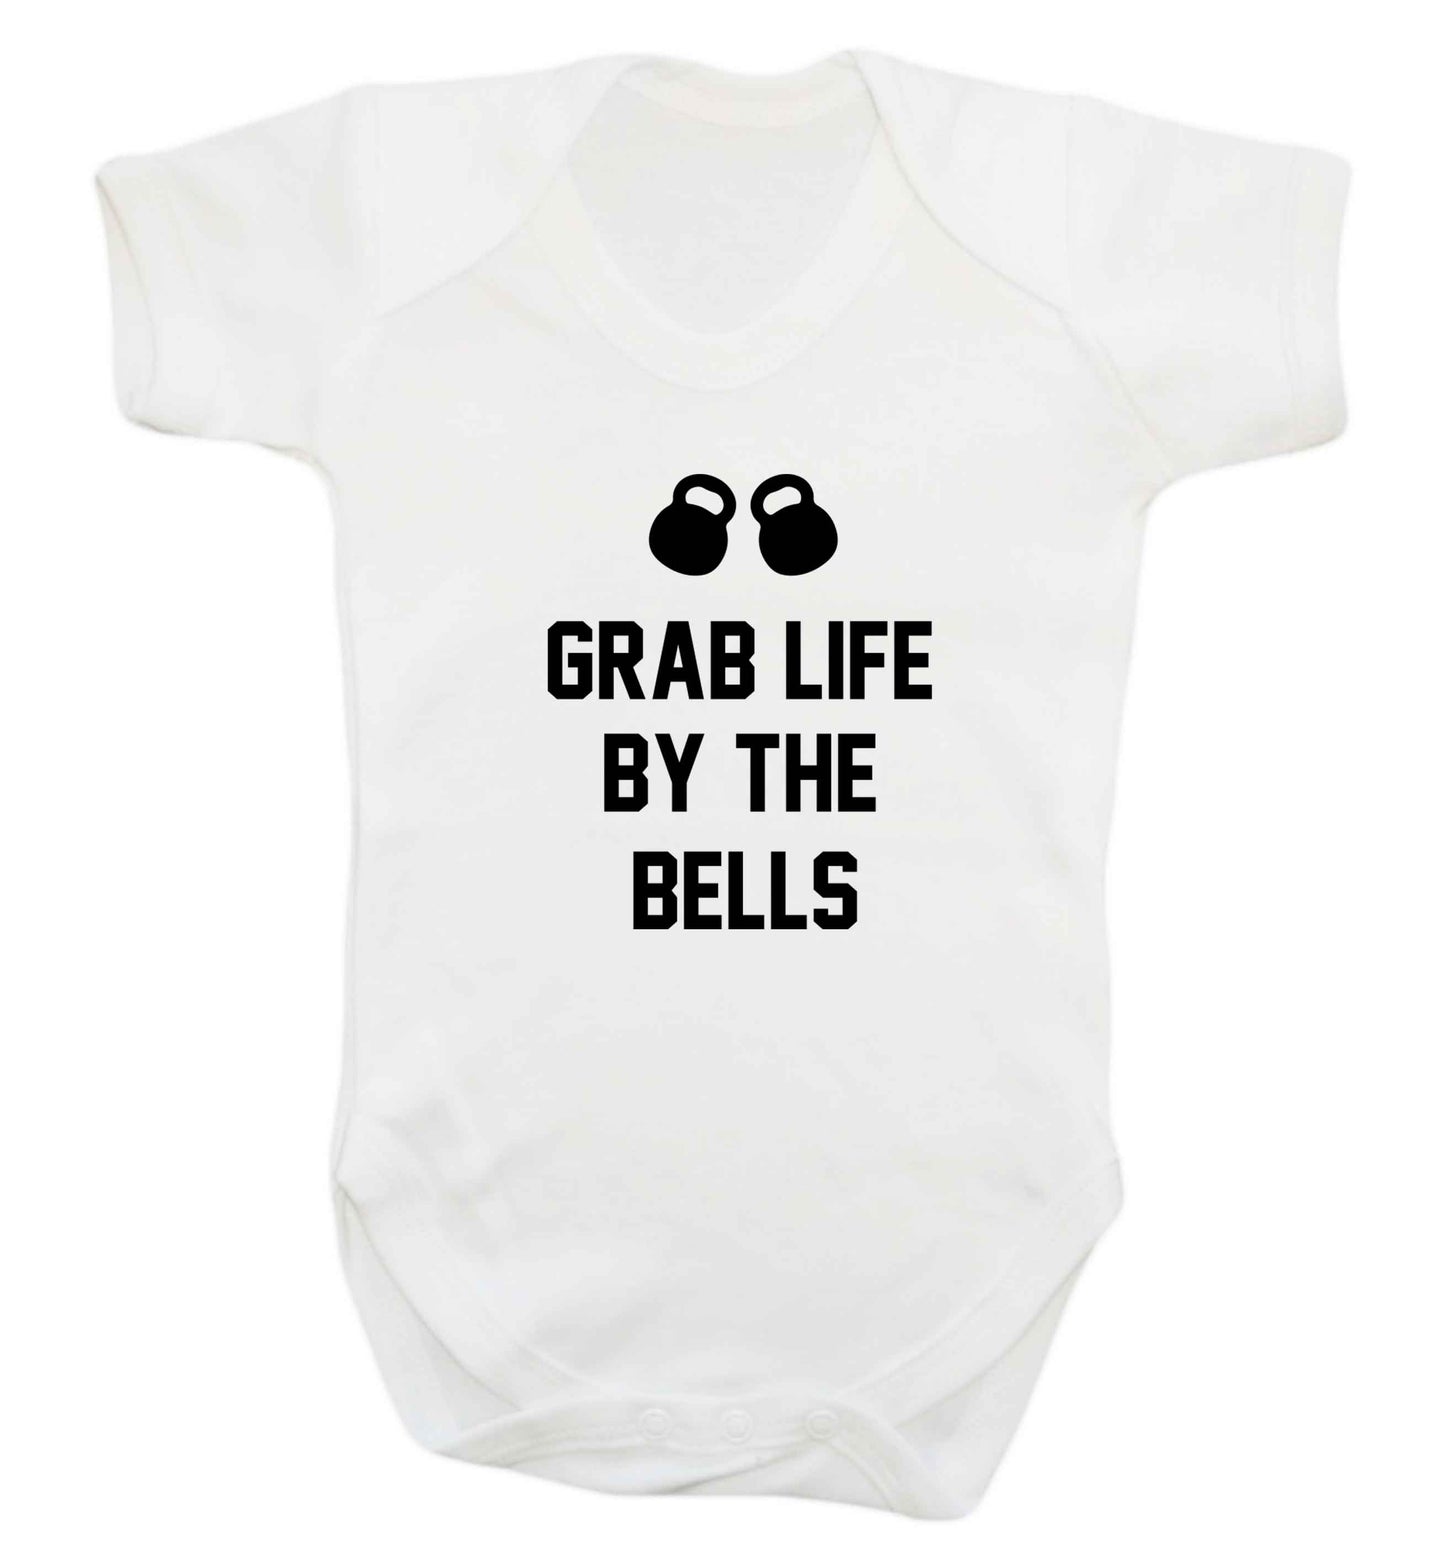 Grab life by the bells baby vest white 18-24 months